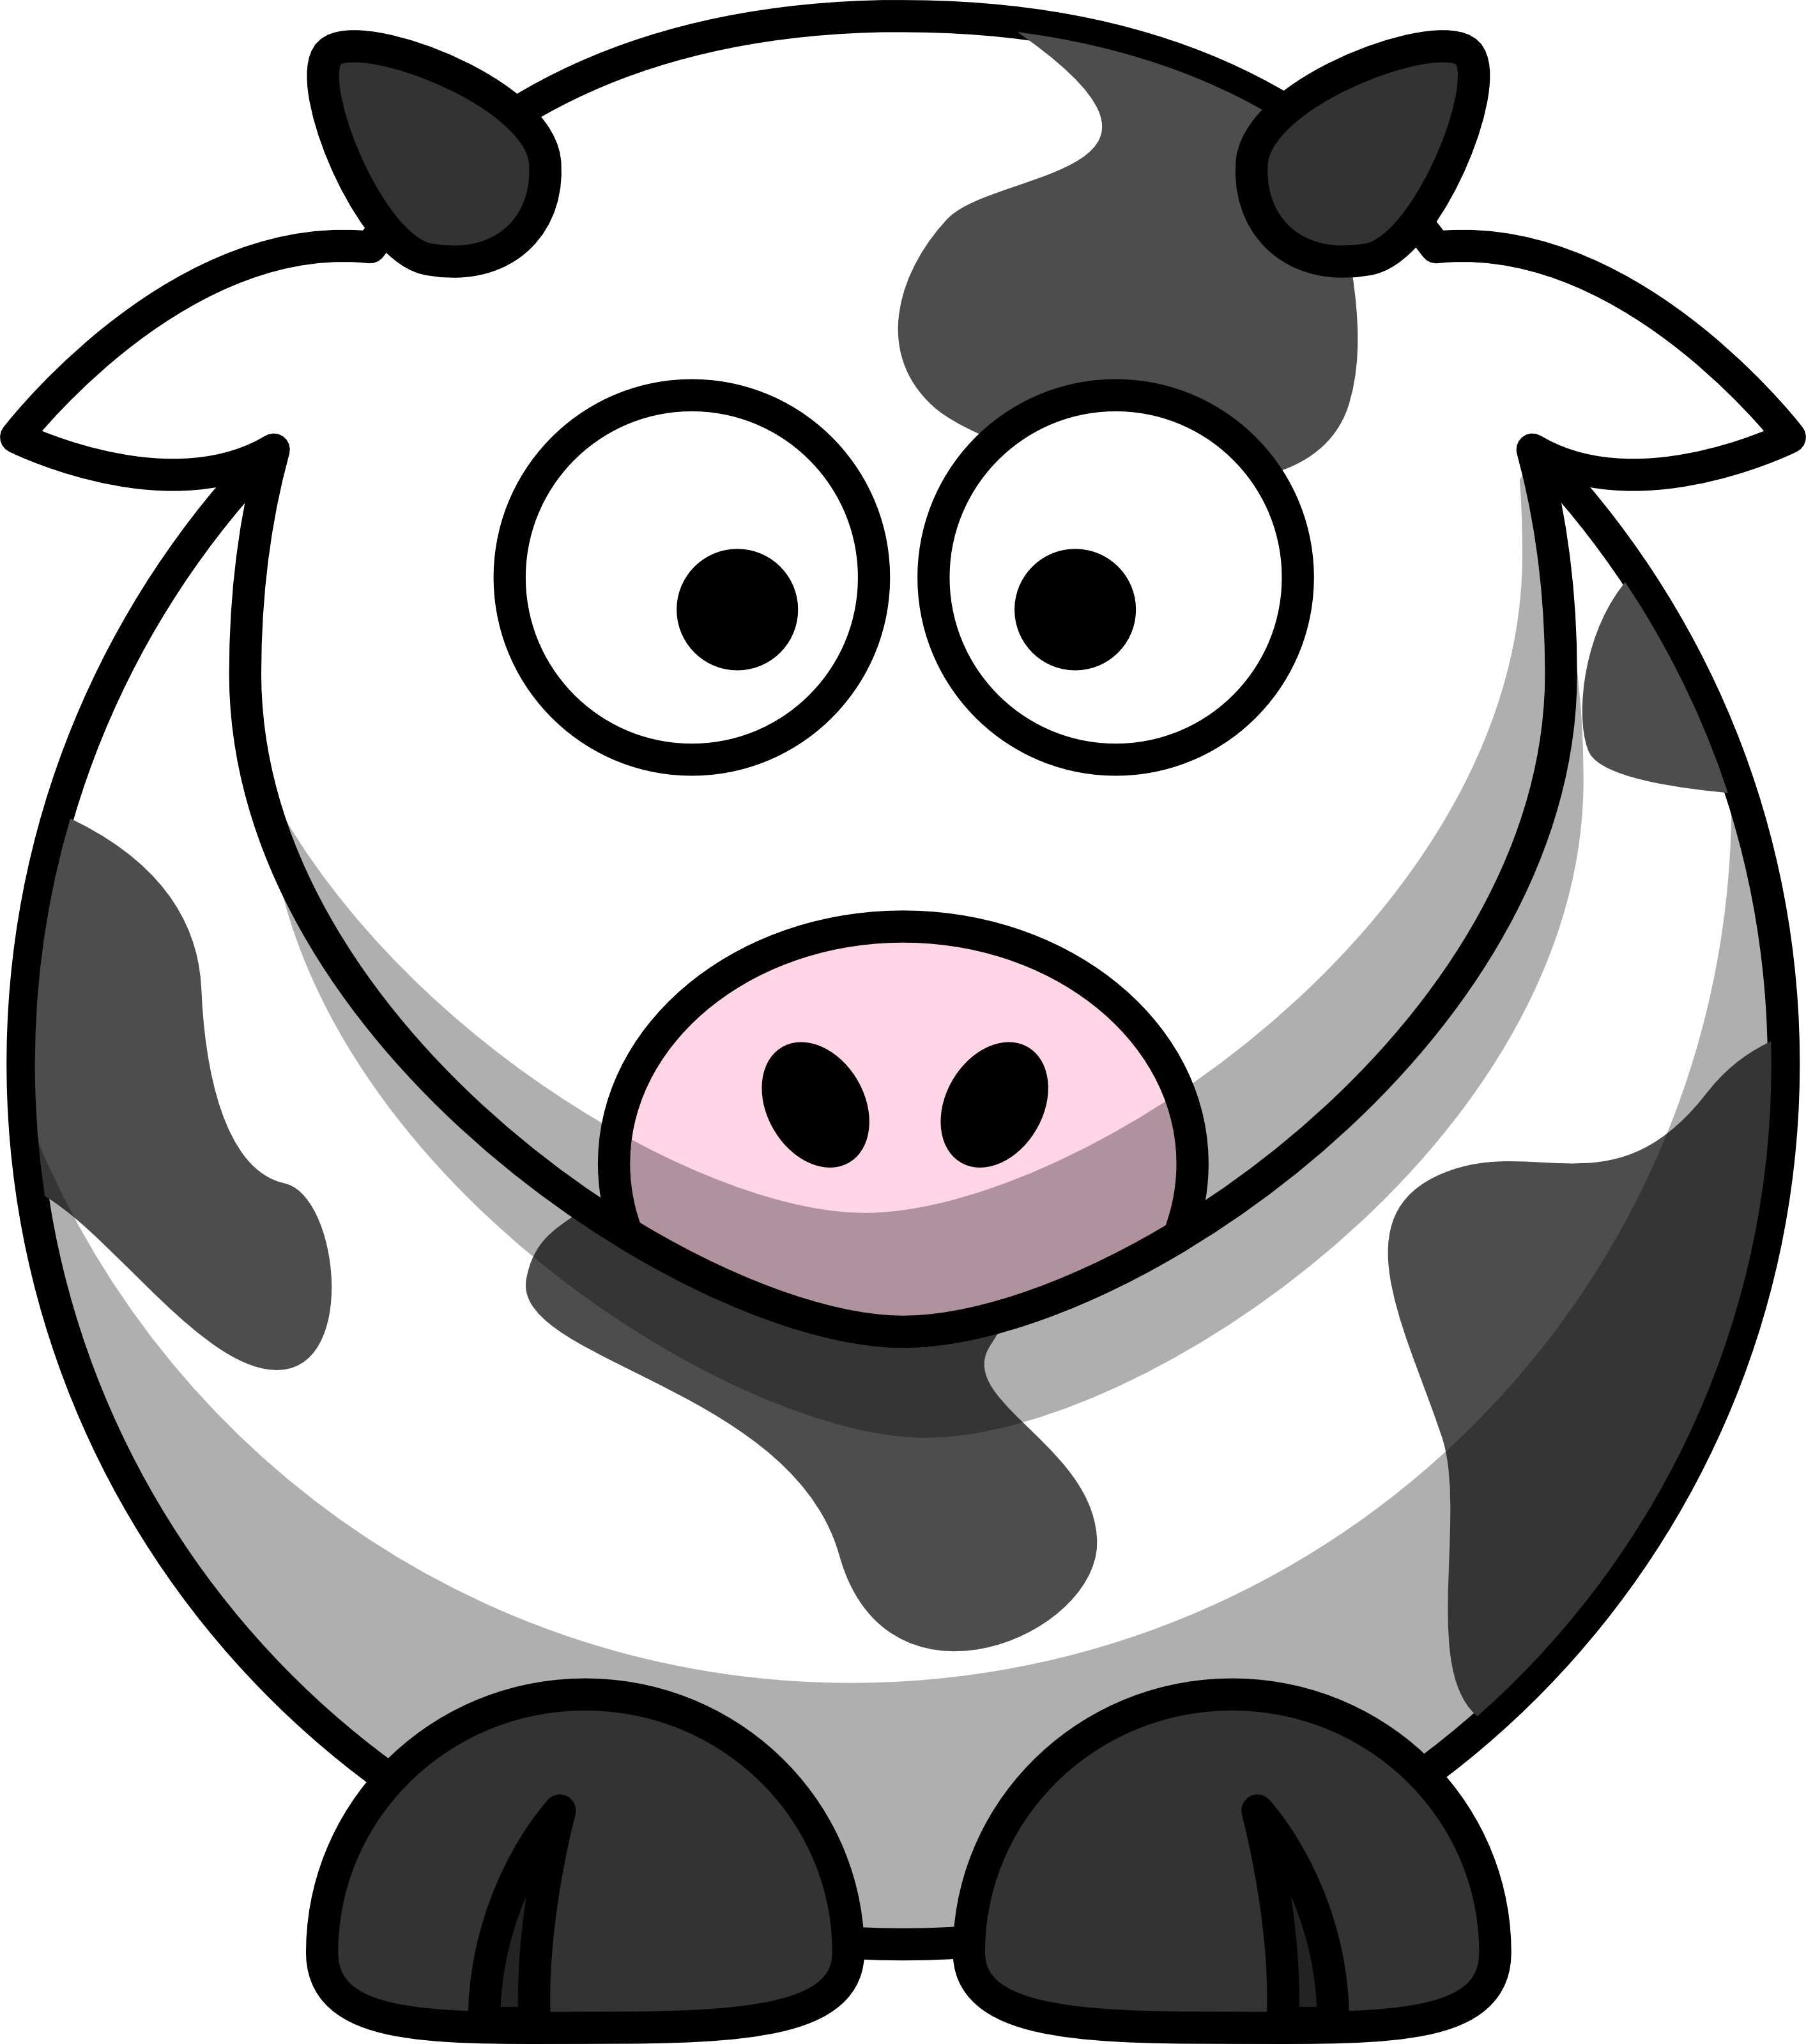 Clipart cow simple. Google image result for